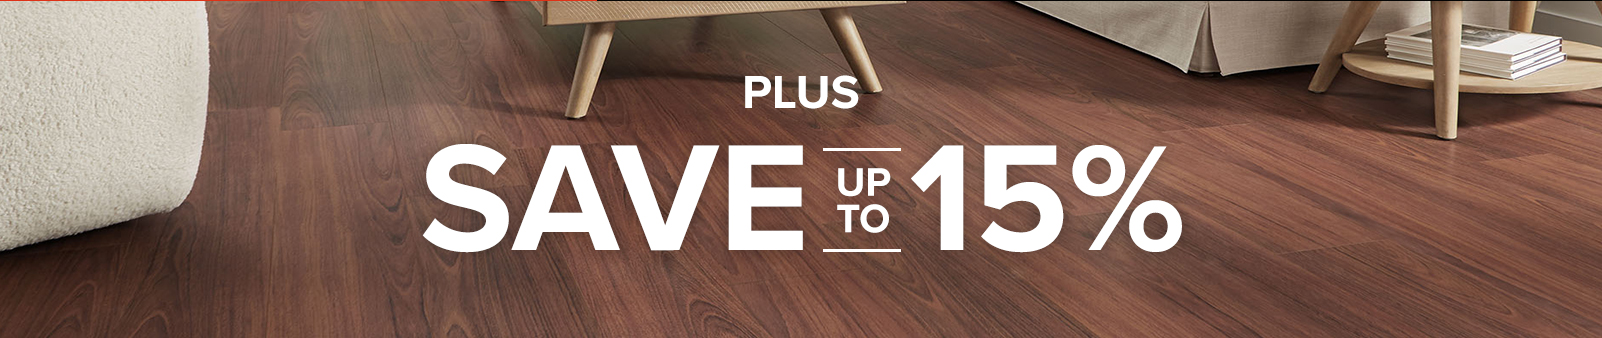 PLUS SAVE UP TO 15 PERCENT